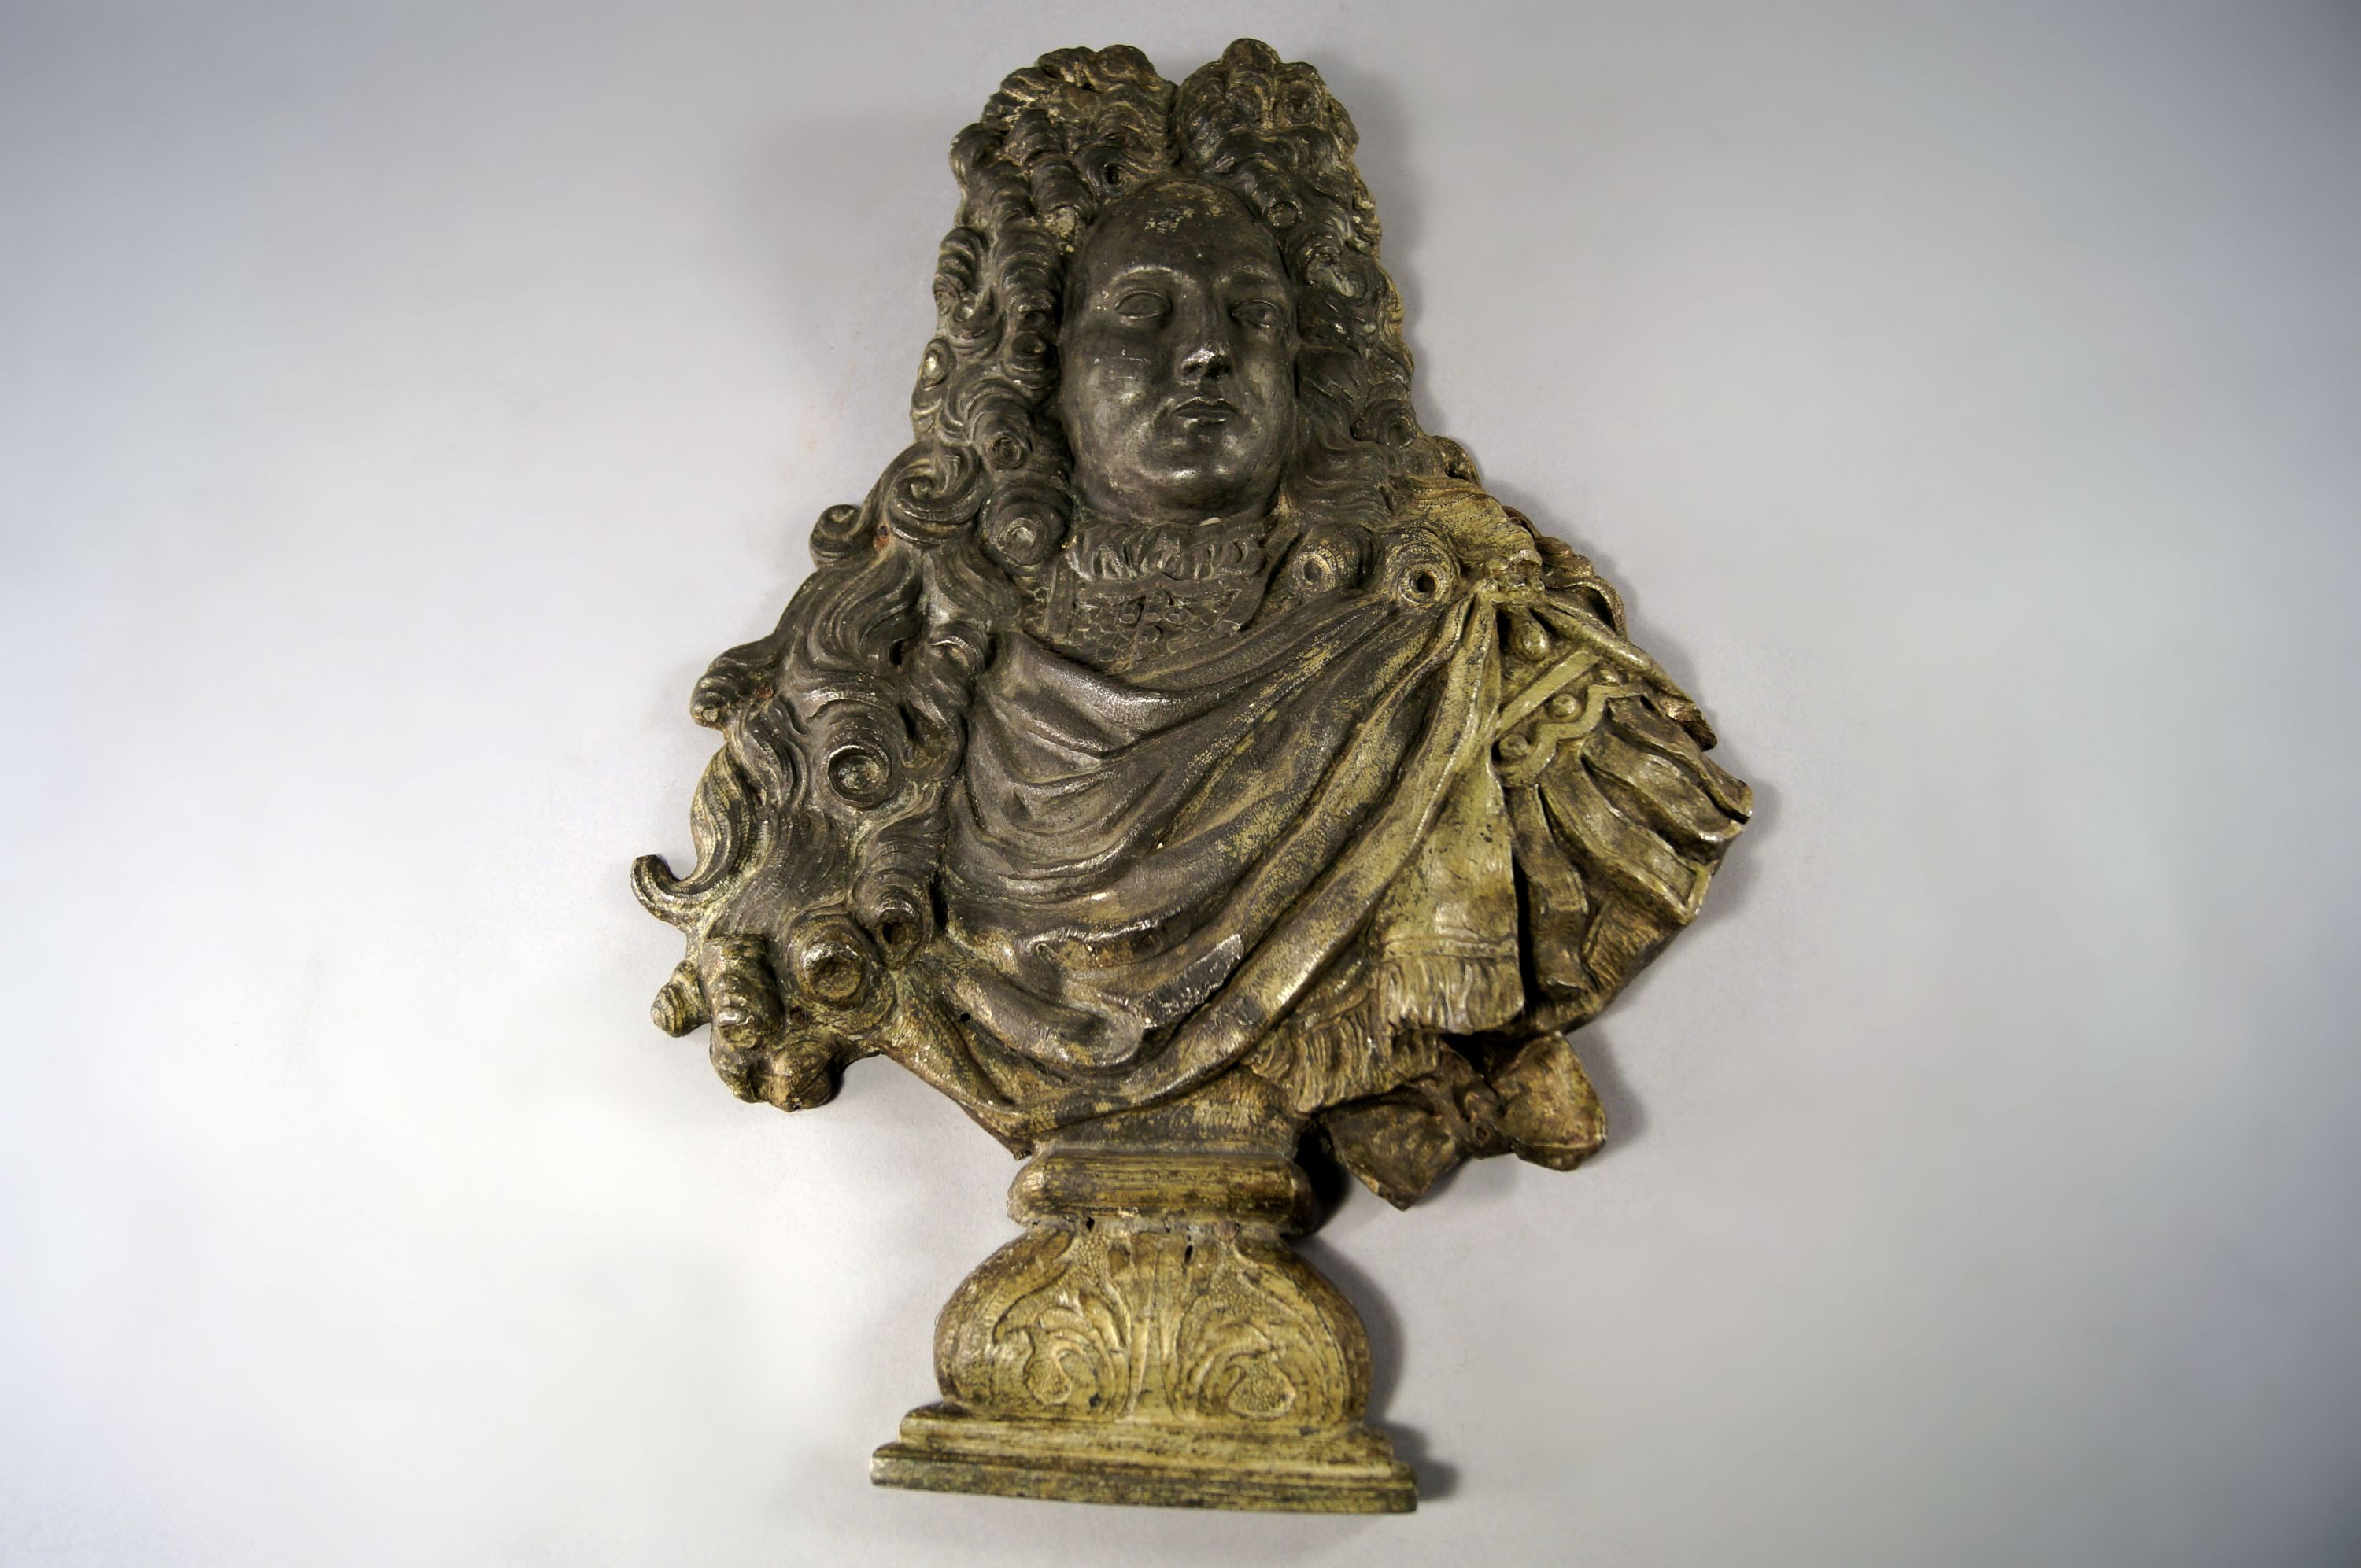 A lead relief plaque of a gentleman, probably Prince George of Denmark (1653 - 1708), husband of